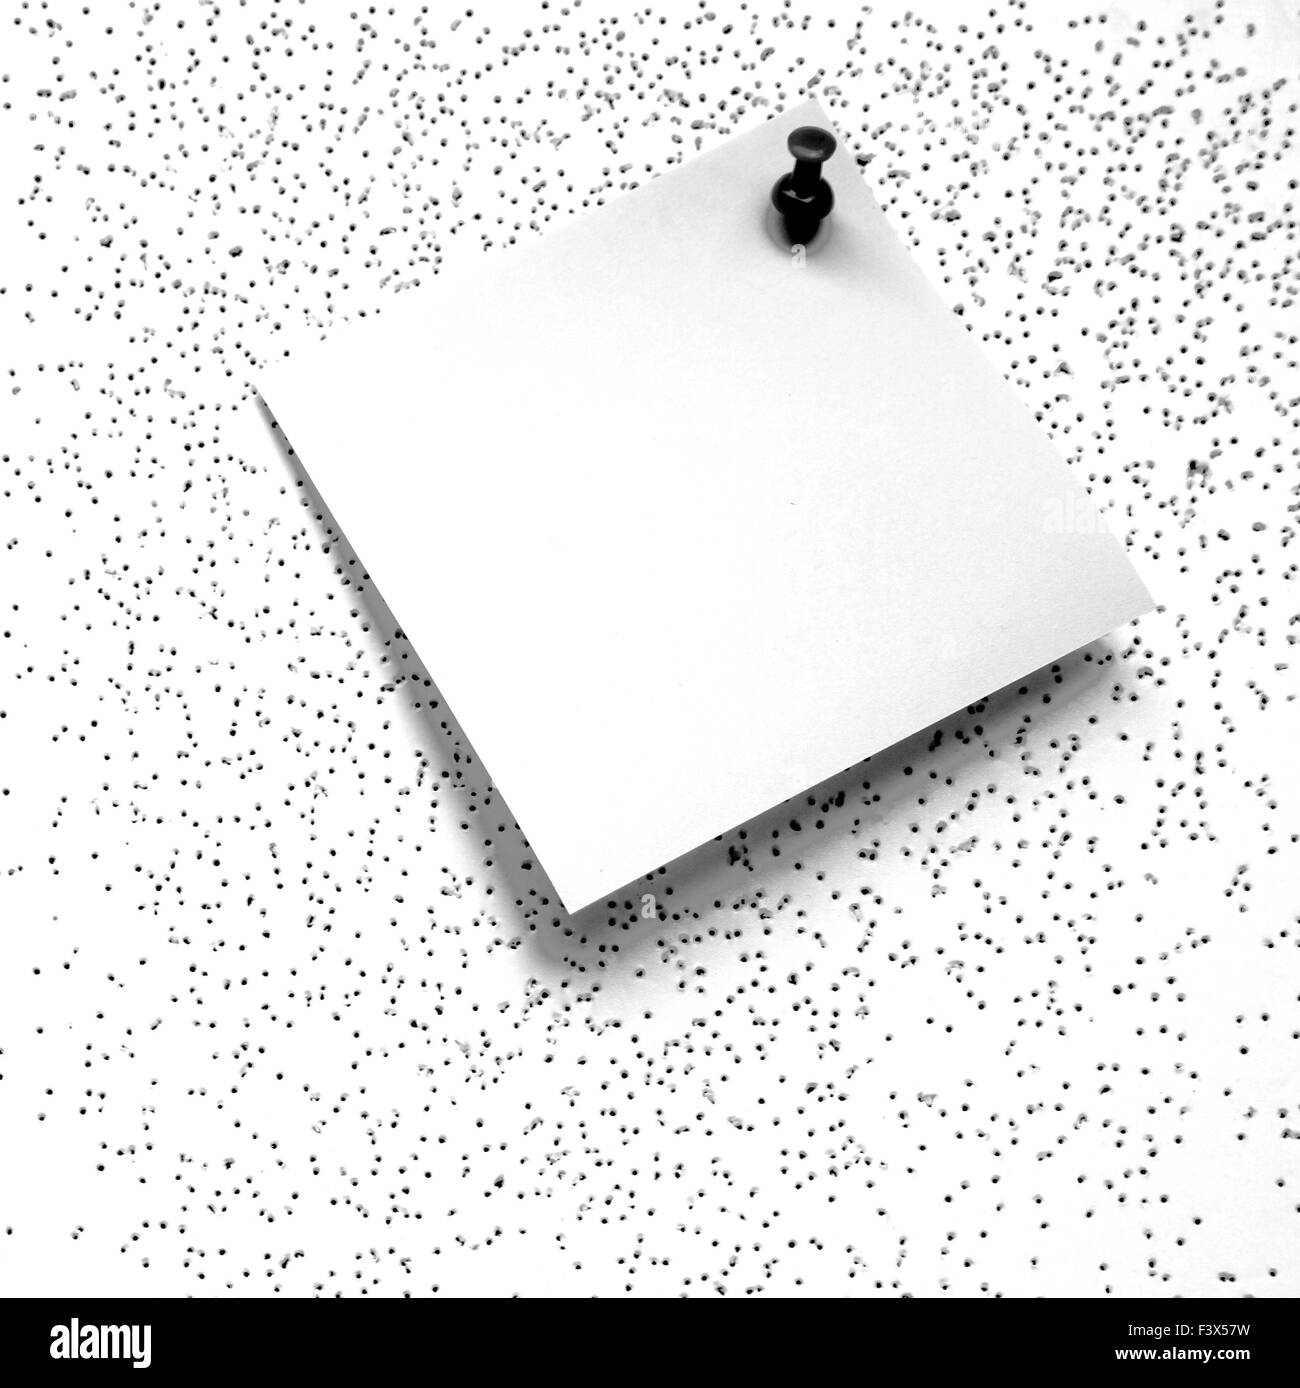 Blank post it notes Black and White Stock Photos & Images - Alamy